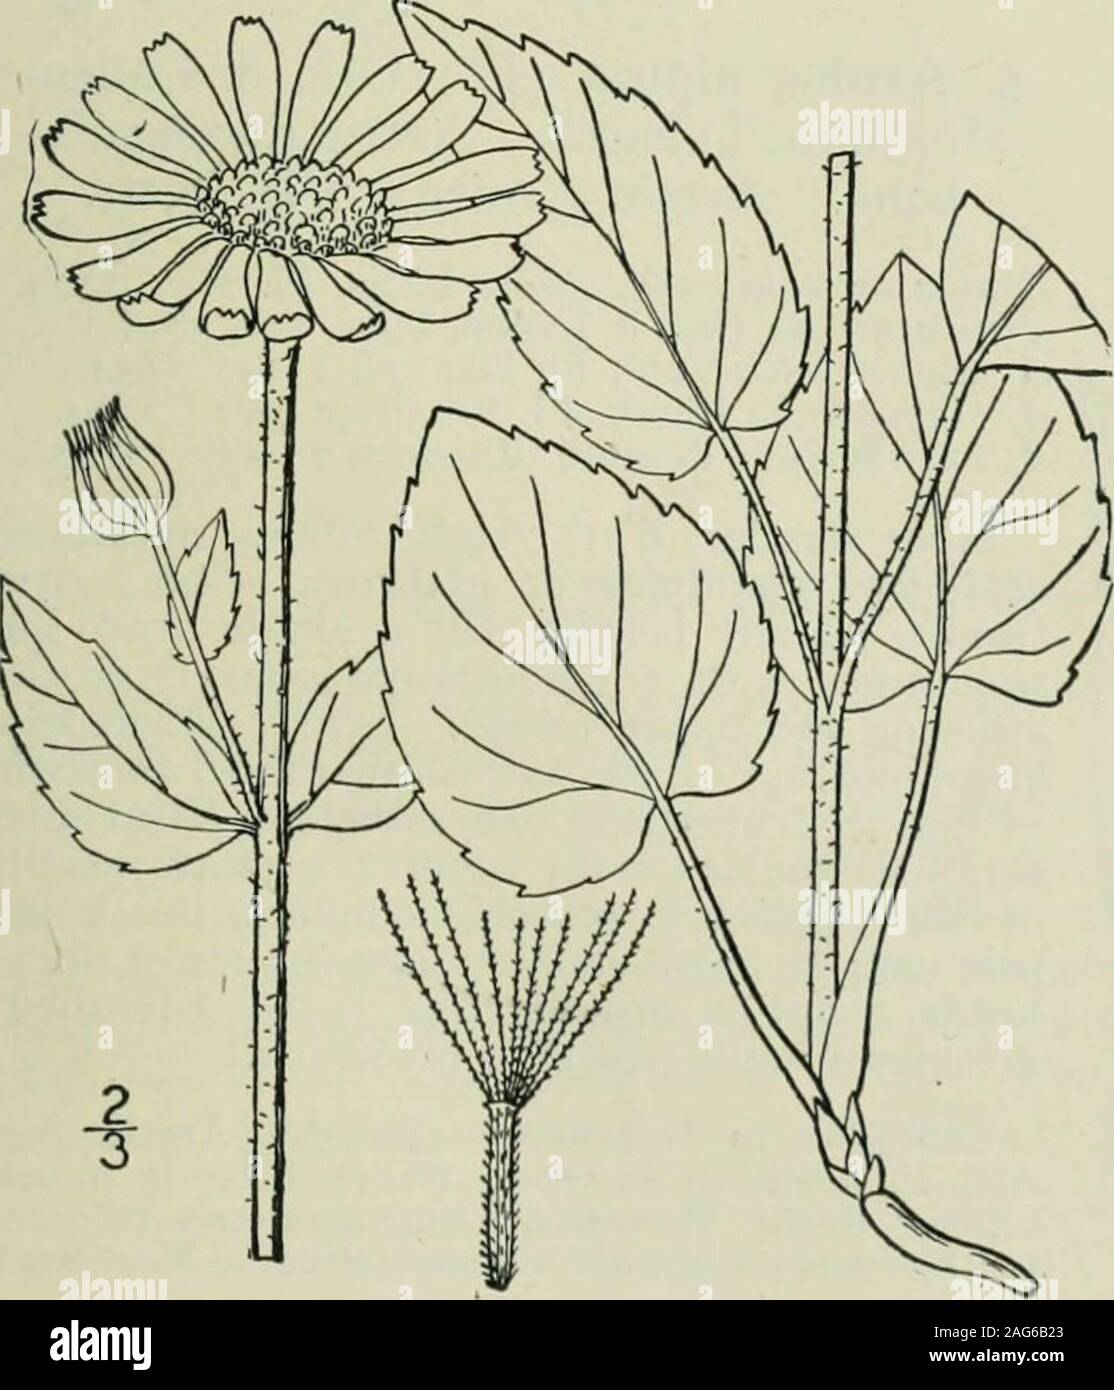 . An illustrated flora of the northern United States, Canada and the British possessions : from Newfoundland to the parallel of the southern boundary of Virginia and from the Atlantic Ocean westward to the 102nd meridian. ovate. 2. A. cordifolia. Basal leaves not cordate, tapering to the petiole.Leaves dentate. Pappus brownish, plumose. 3. Pappus white, barbellate. 4. Leaves entire or nearly so. 5. A. mollis. A. chionopappa. A. alpina. I. Arnica acaulis (Walt.) B.S.P.Leopards-bane. Fig. 4599. Doronicum acaule Walt. Fl. Car. 205. 1788.Arnica Claytoni Pursh, Fl. Am. Sept. 527. 1814.Arnica niidic Stock Photo